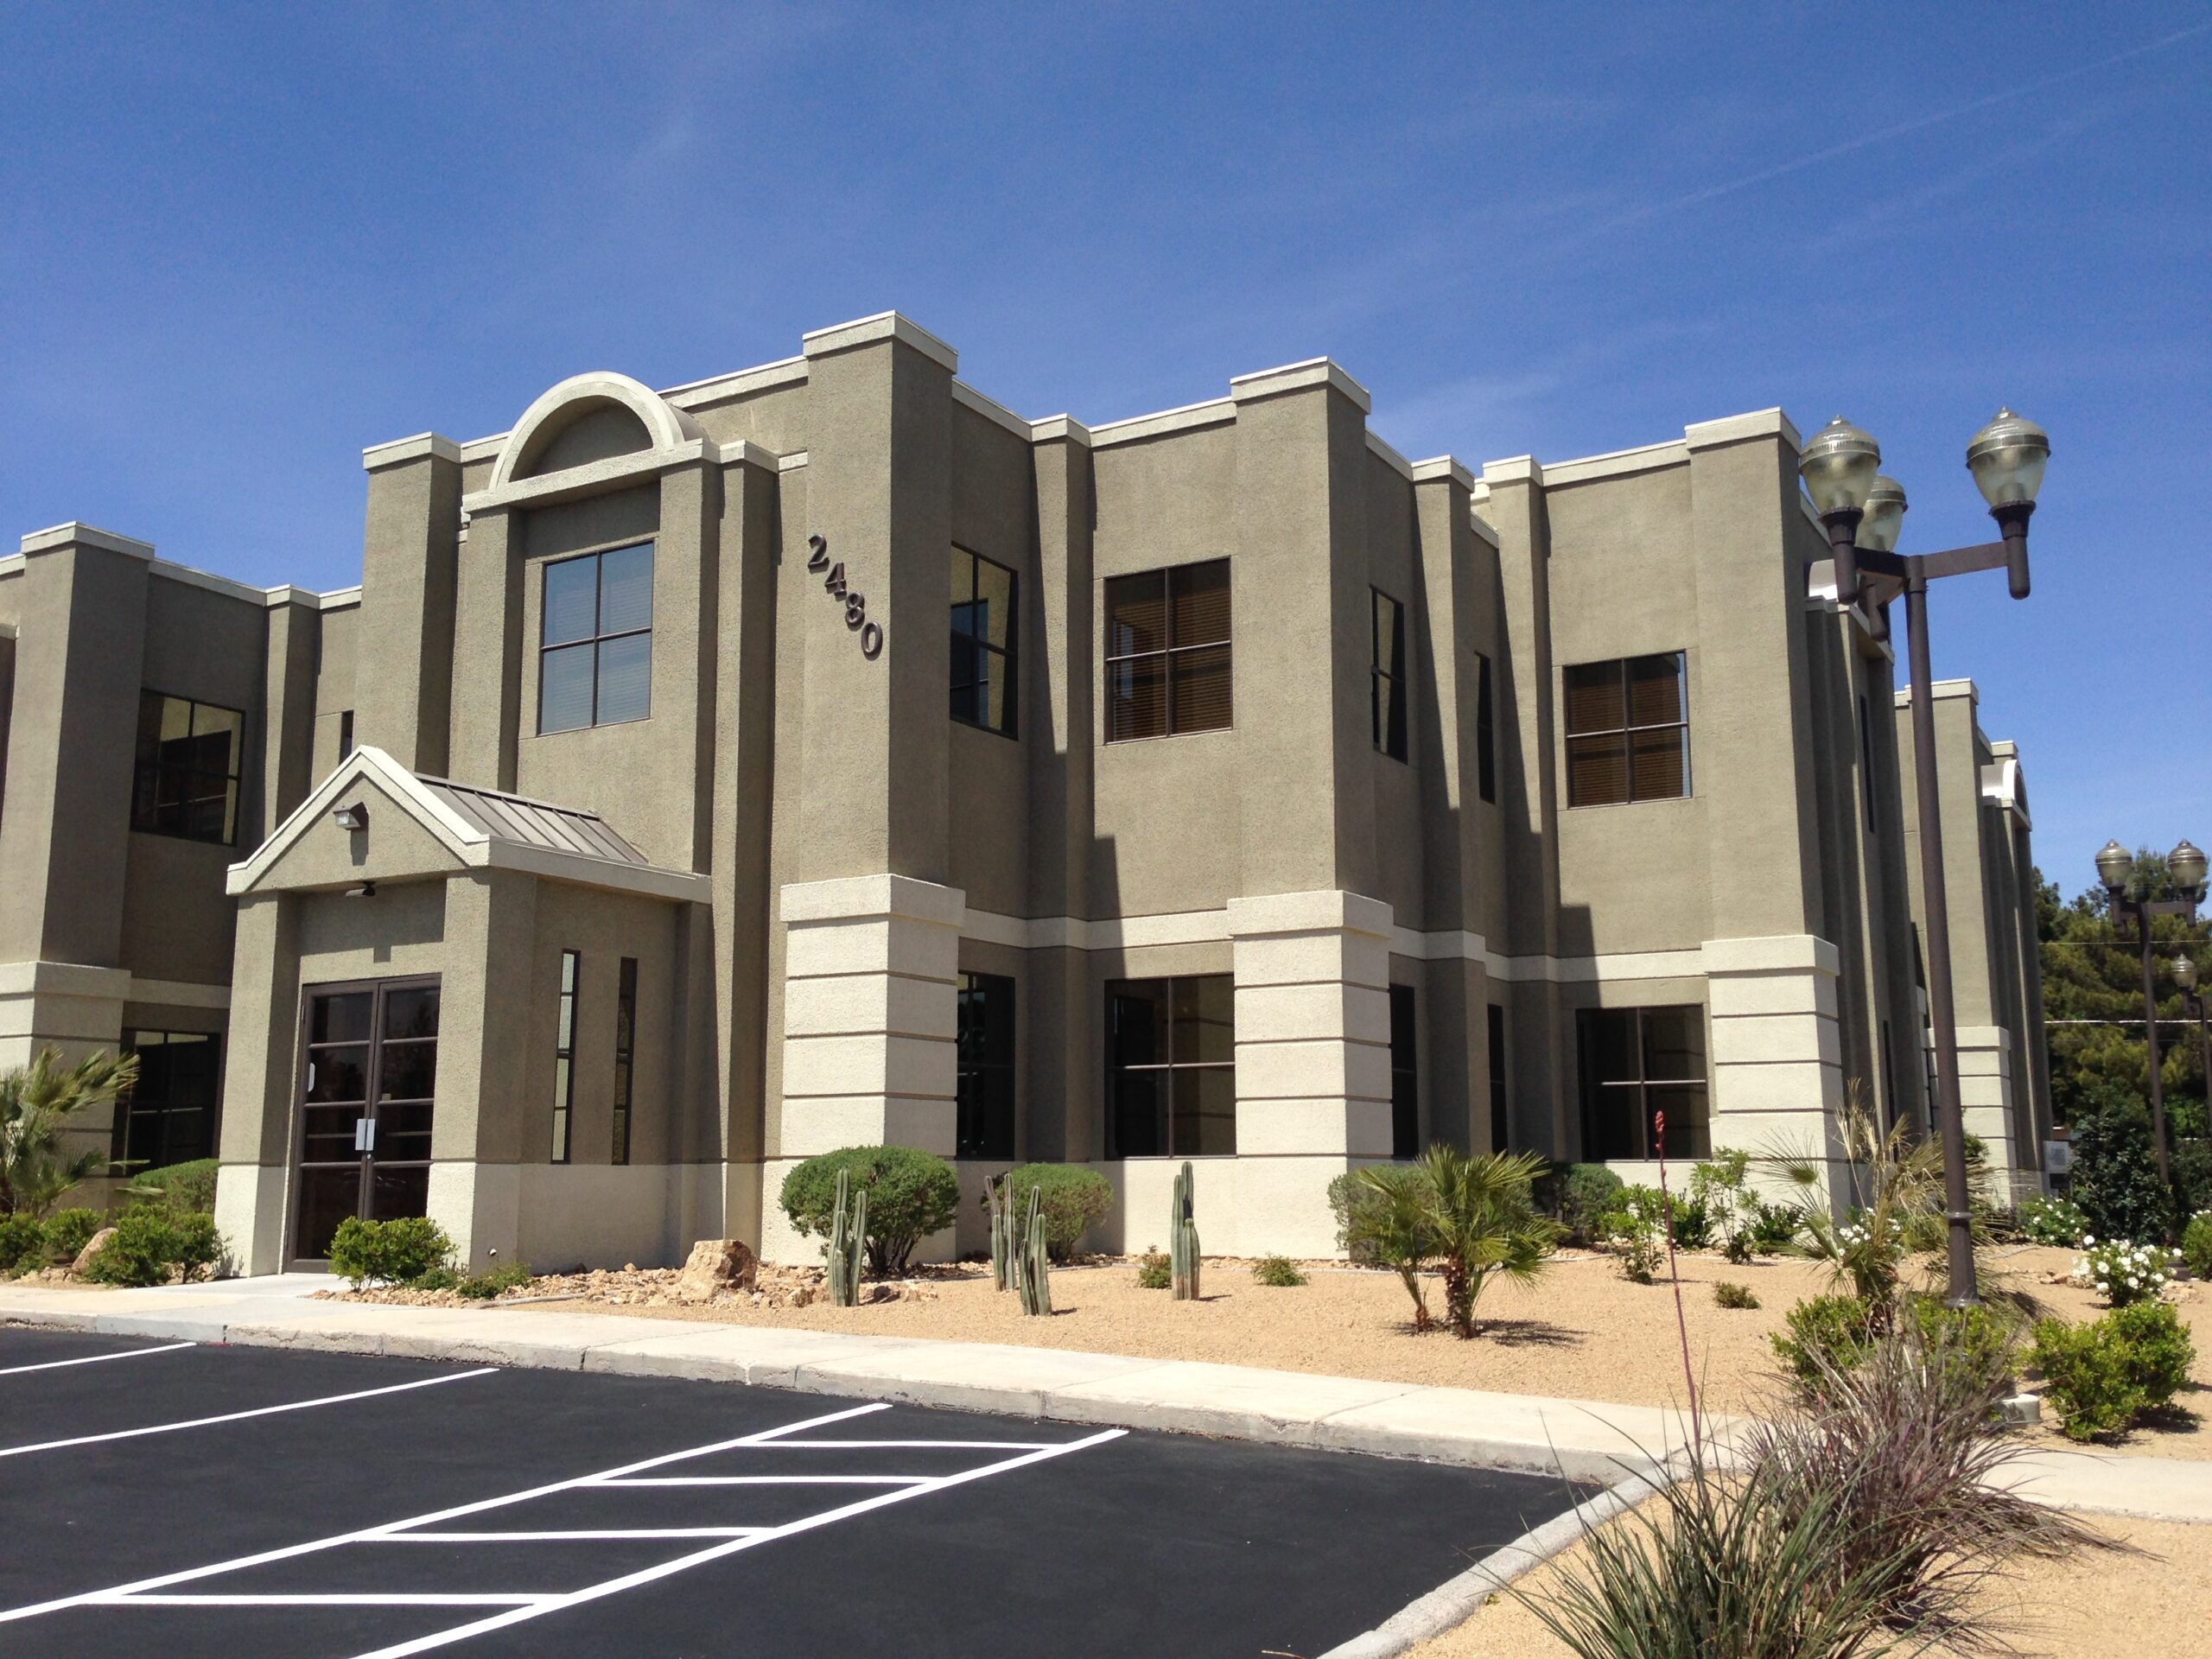 Colliers International – Las Vegas announced the finalization a lease of an approximately 2,400-square-foot medical office property in Las Vegas.